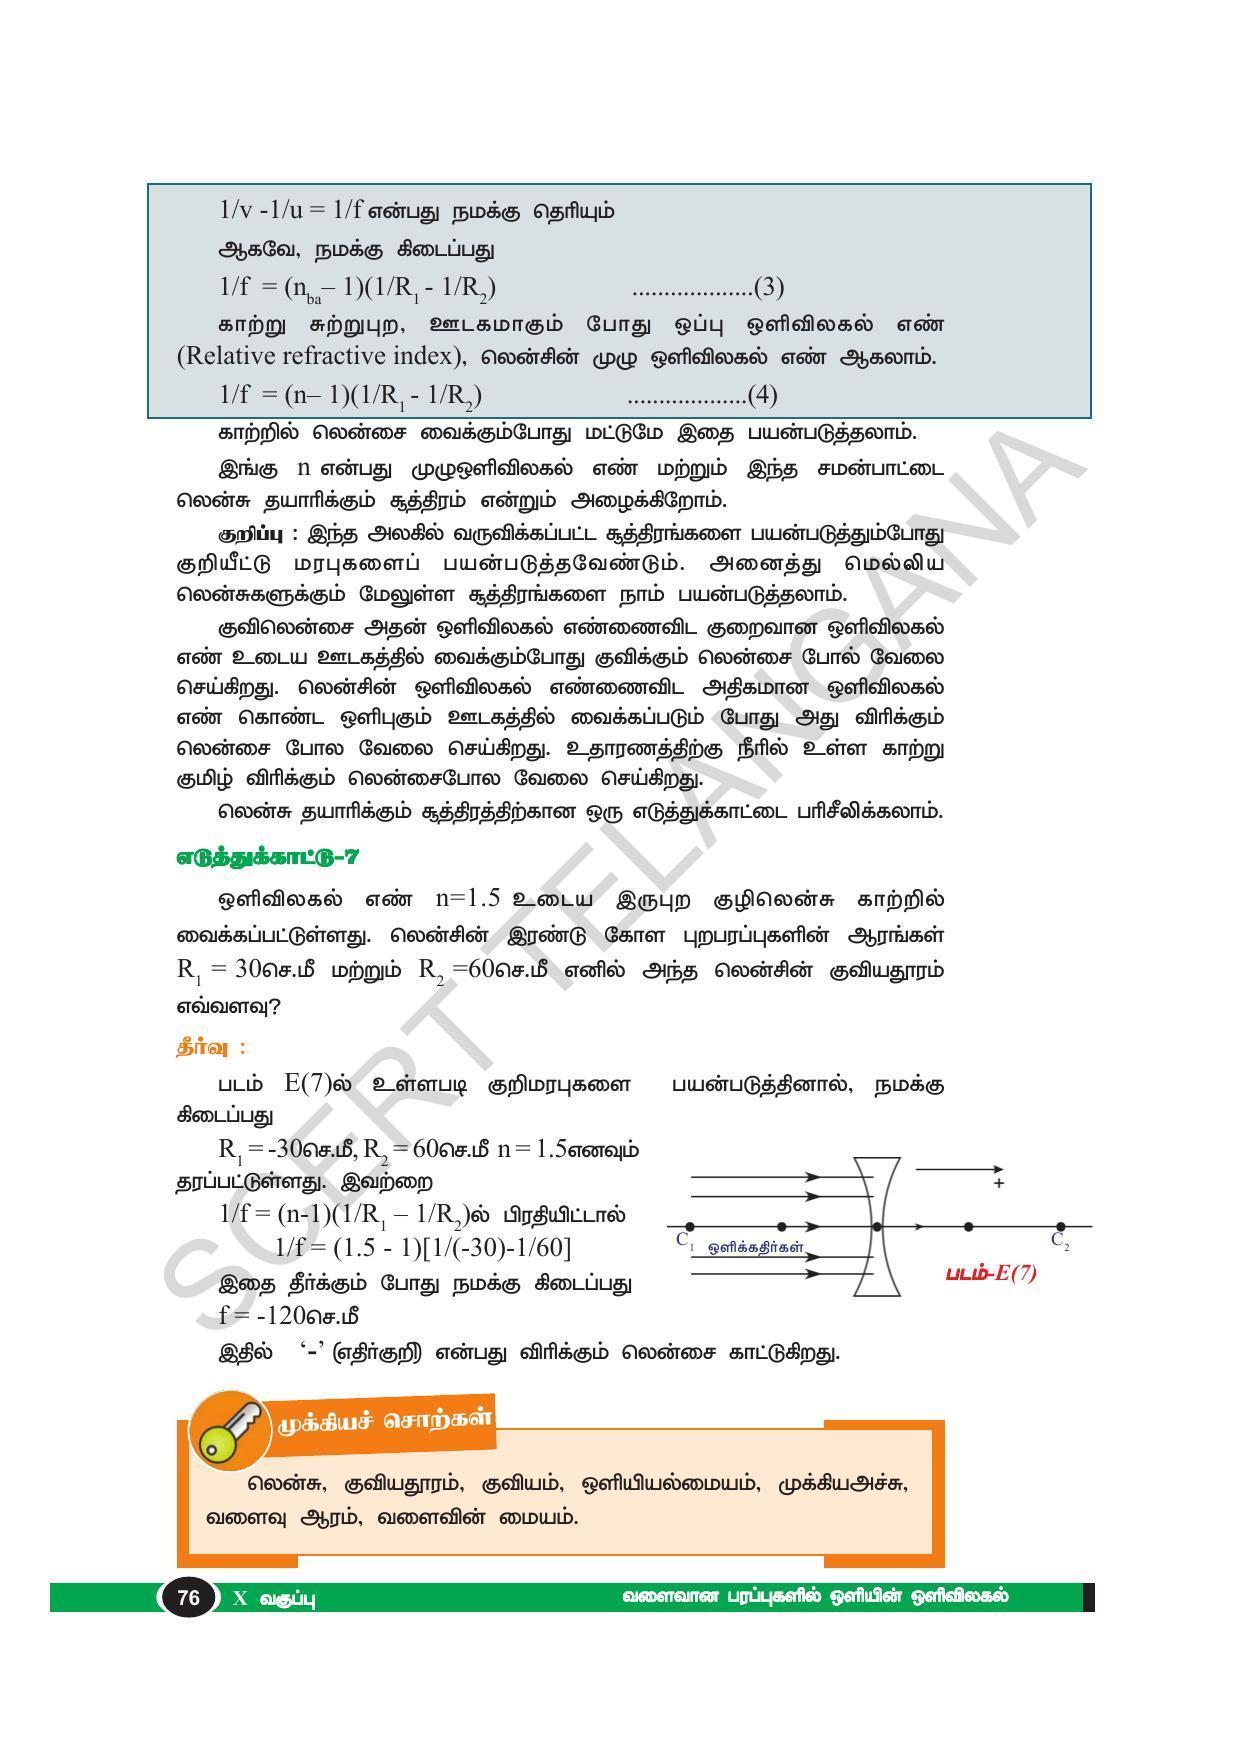 TS SCERT Class 10 Physical Science(Tamil Medium) Text Book - Page 88